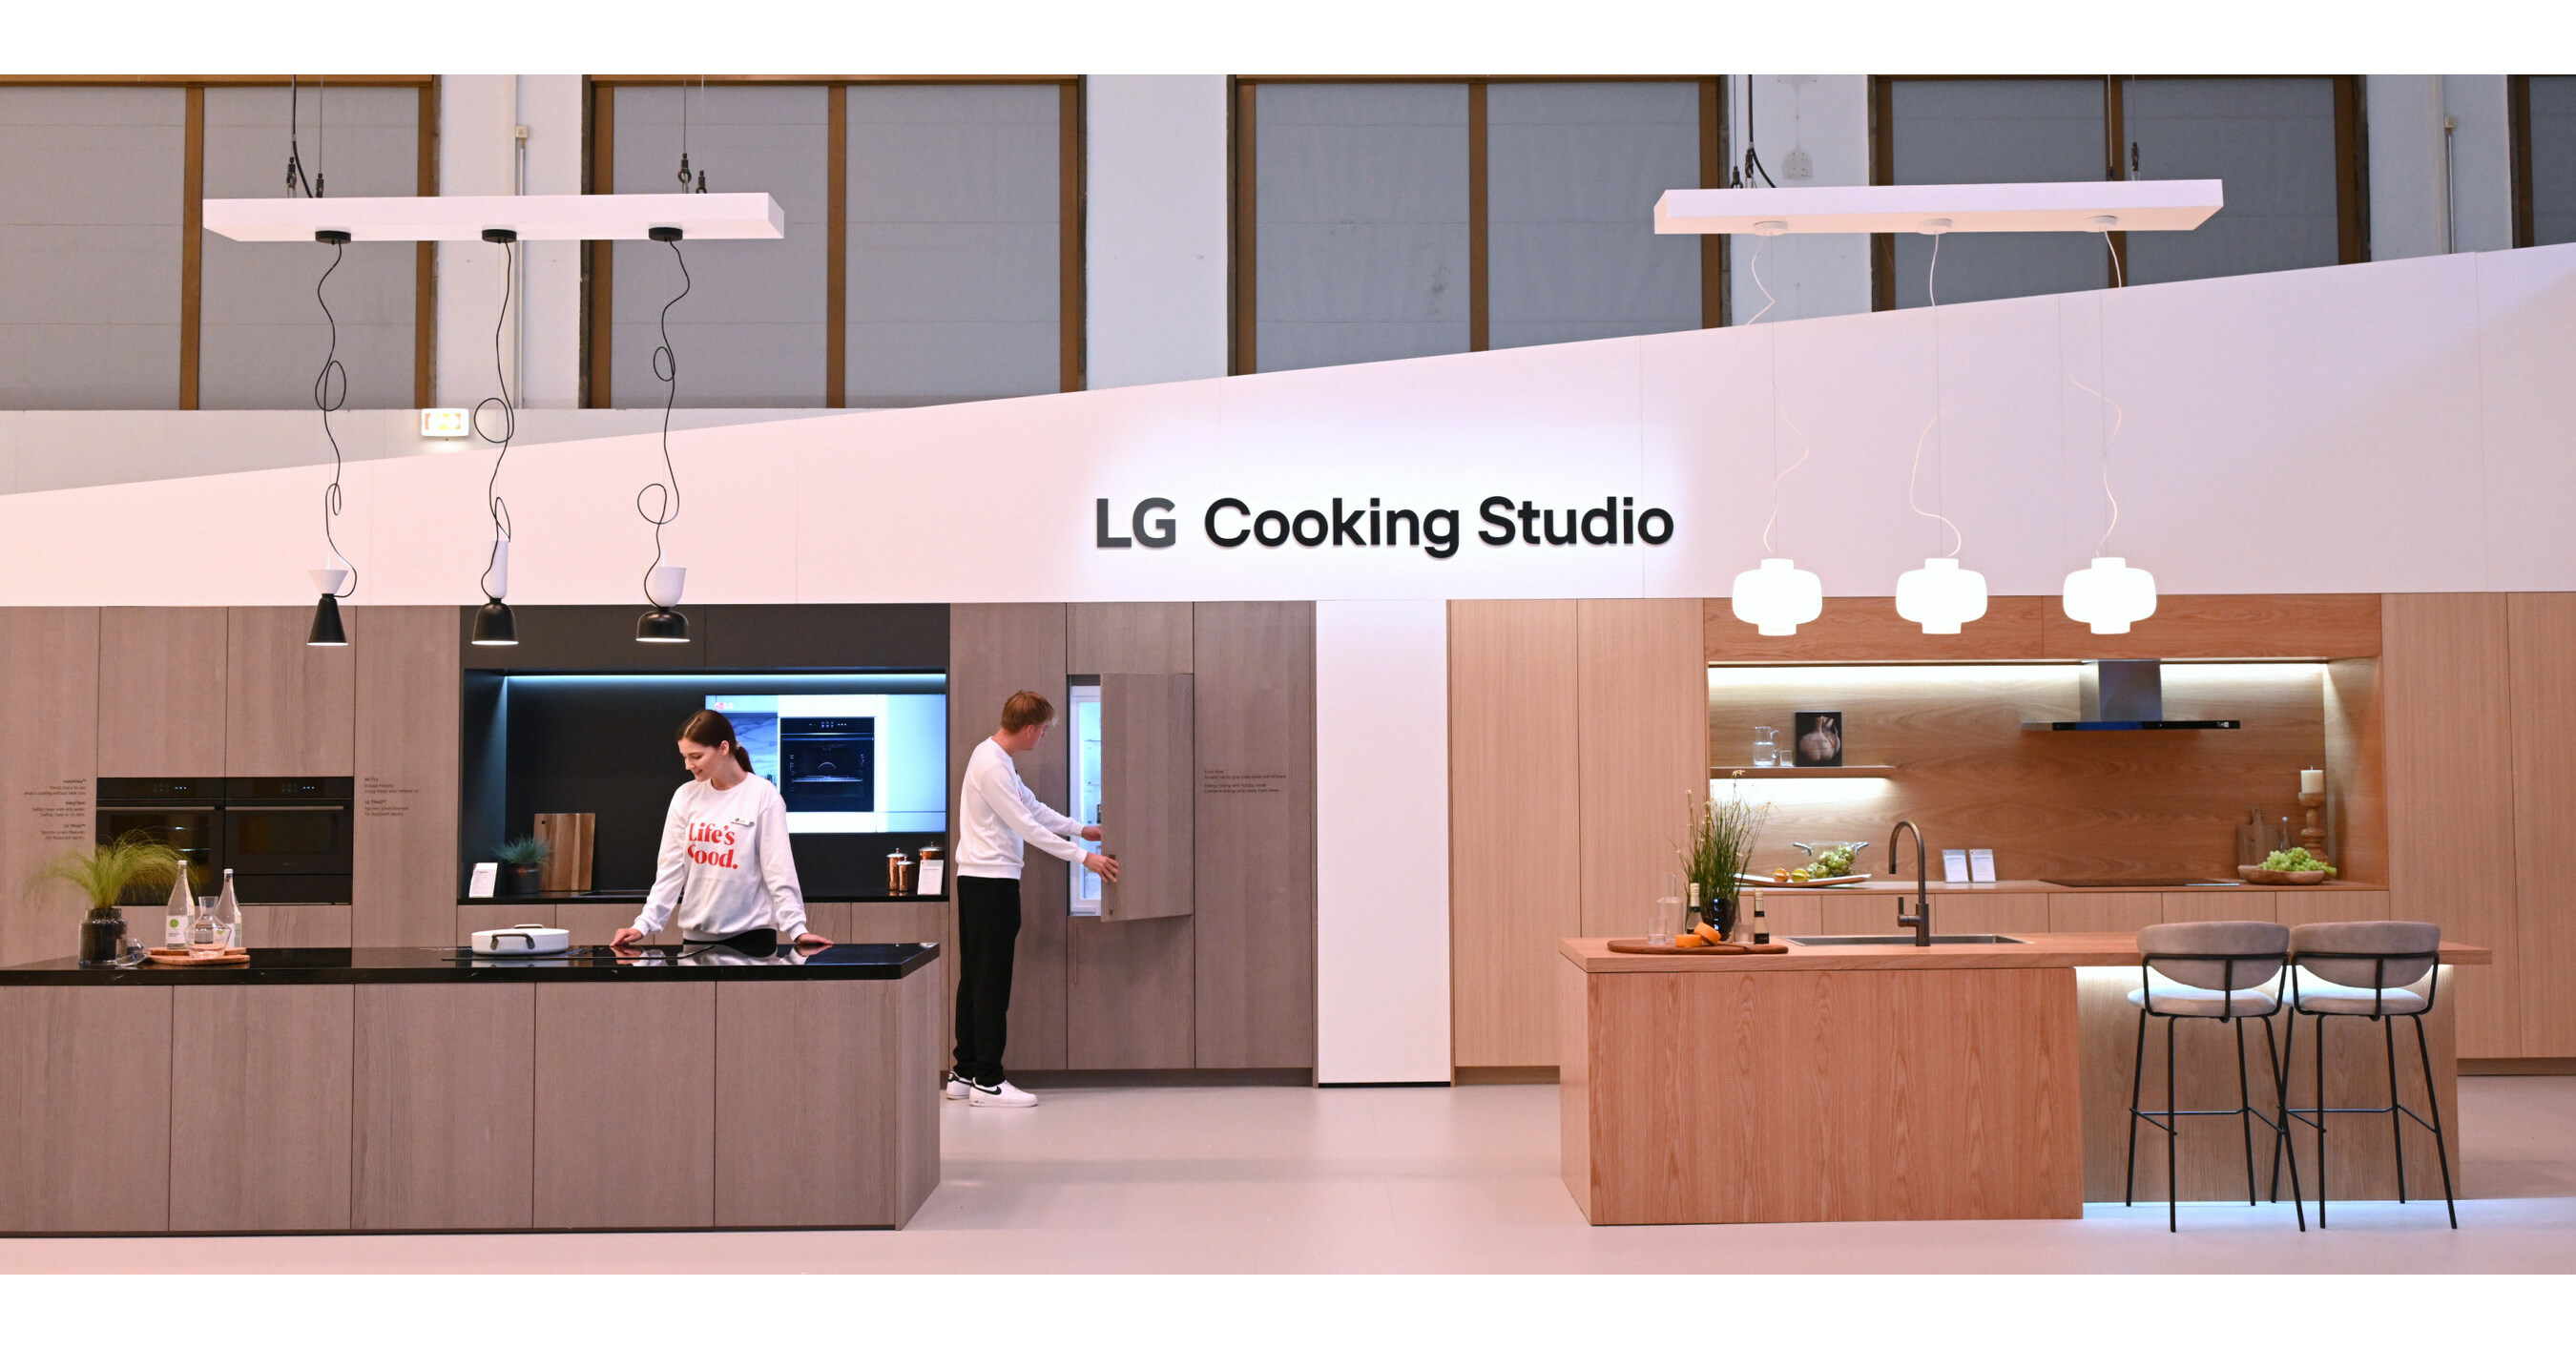 LG DELIVERS 'SUSTAINABLE LIFE, JOY FOR ALL' WITH LATEST HOME